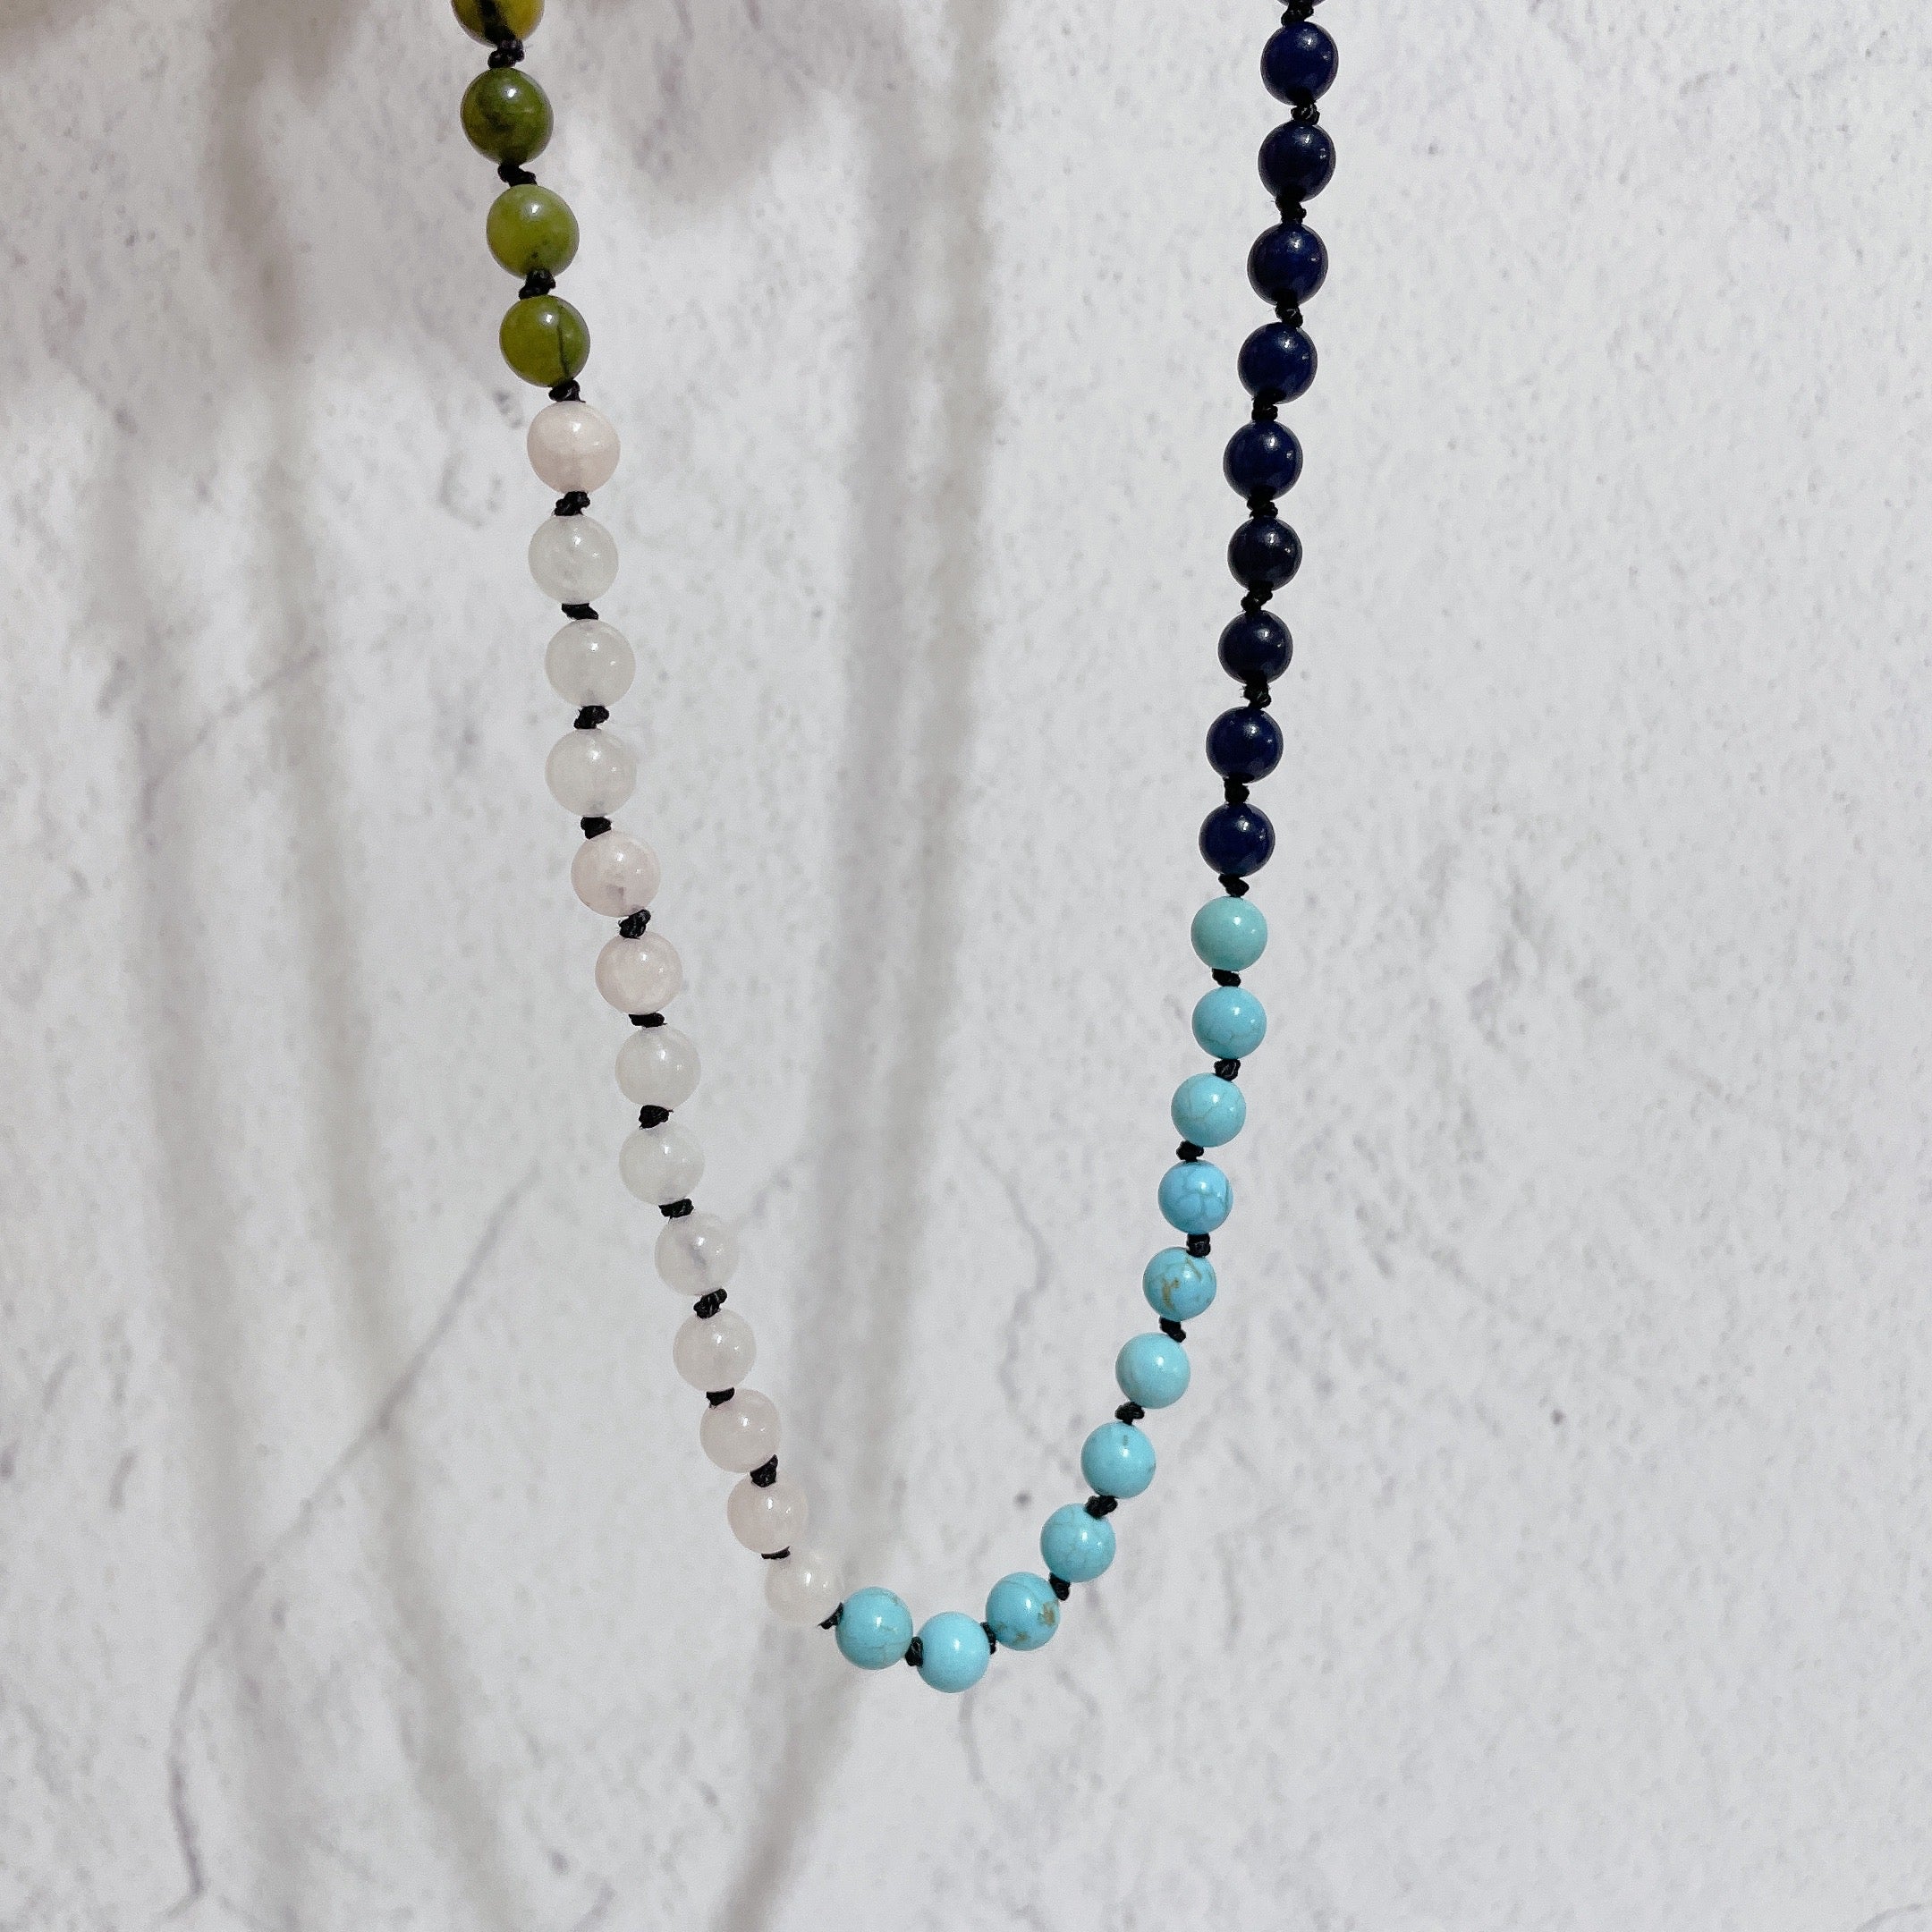 'NEW' COLOURFUL Beaded Gemstone Necklace with Black Silk Thread | Gold | 24"